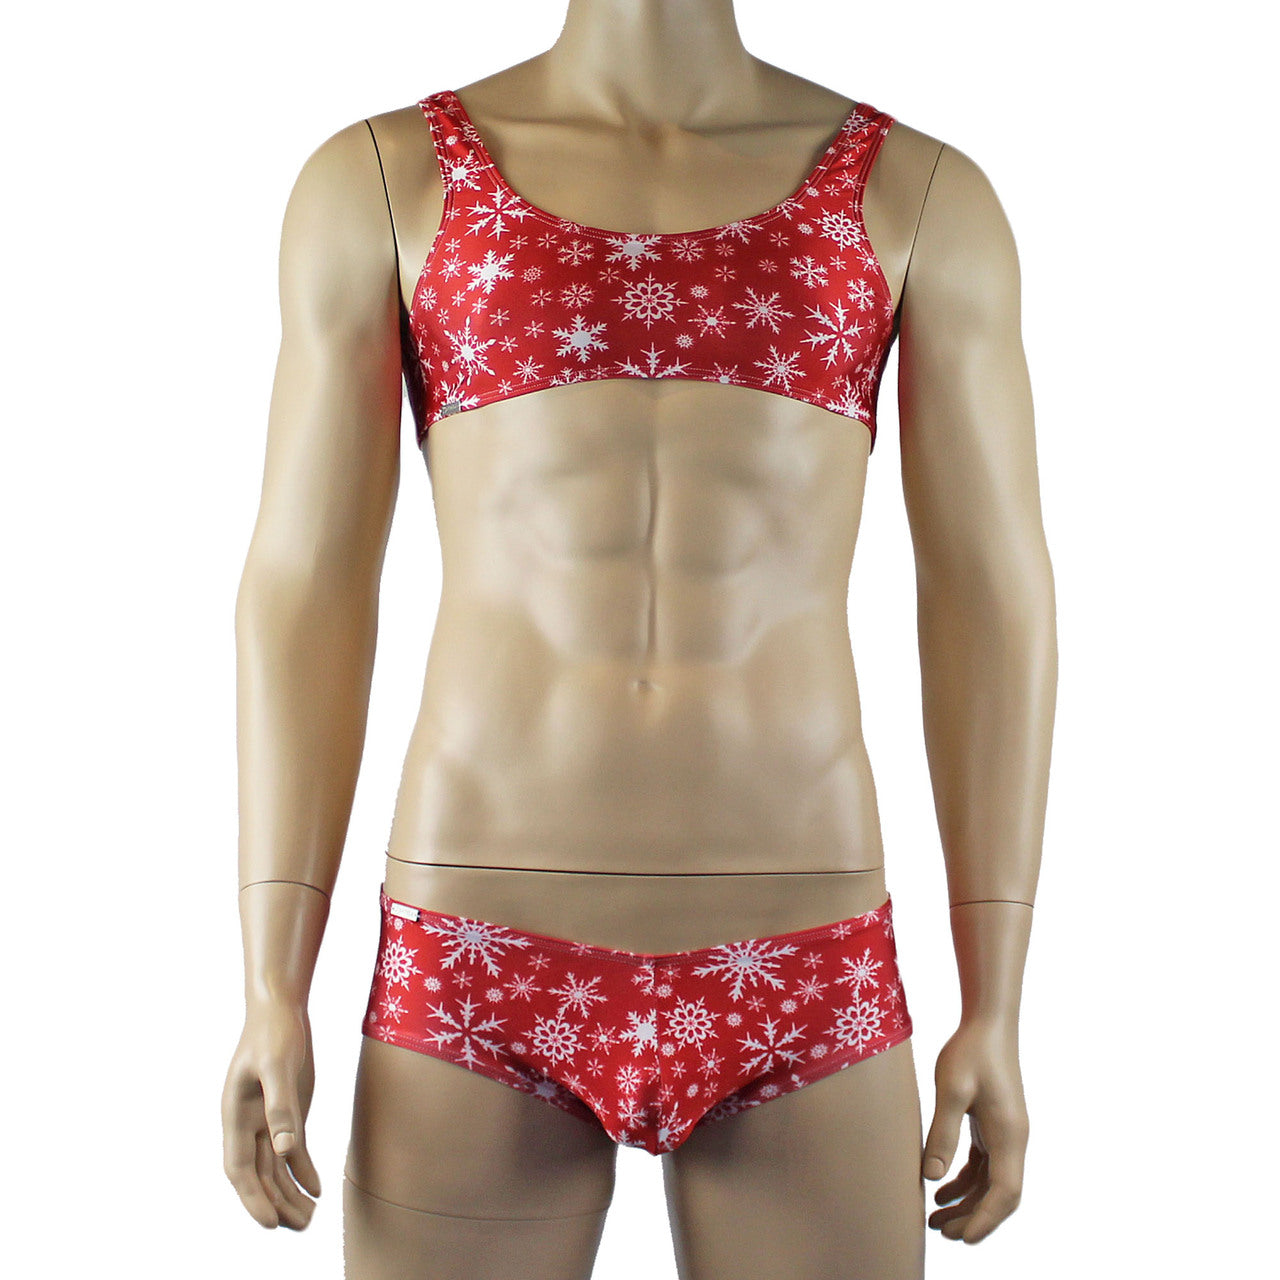 Mens Lingerie Snowflake Bra Top & Low Rise Boxer Brief Red and White